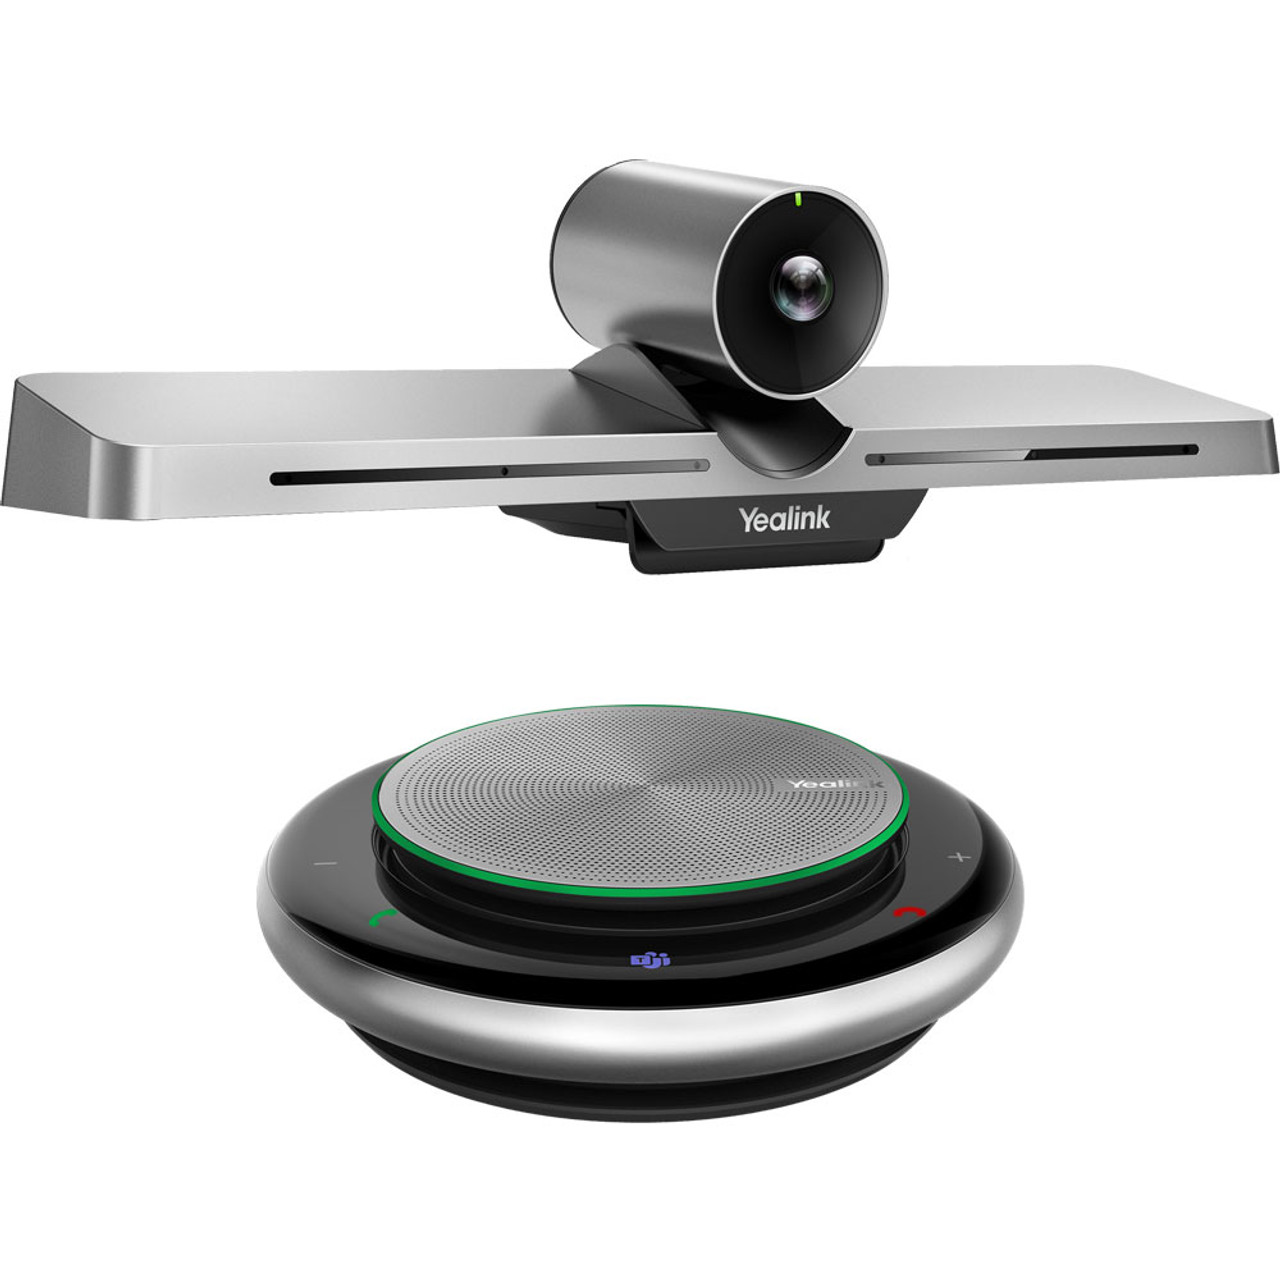 Poly Studio - Small-Medium Room Kit - video conferencing kit - no PC -  7230-87710-001 - Video Conference Systems 